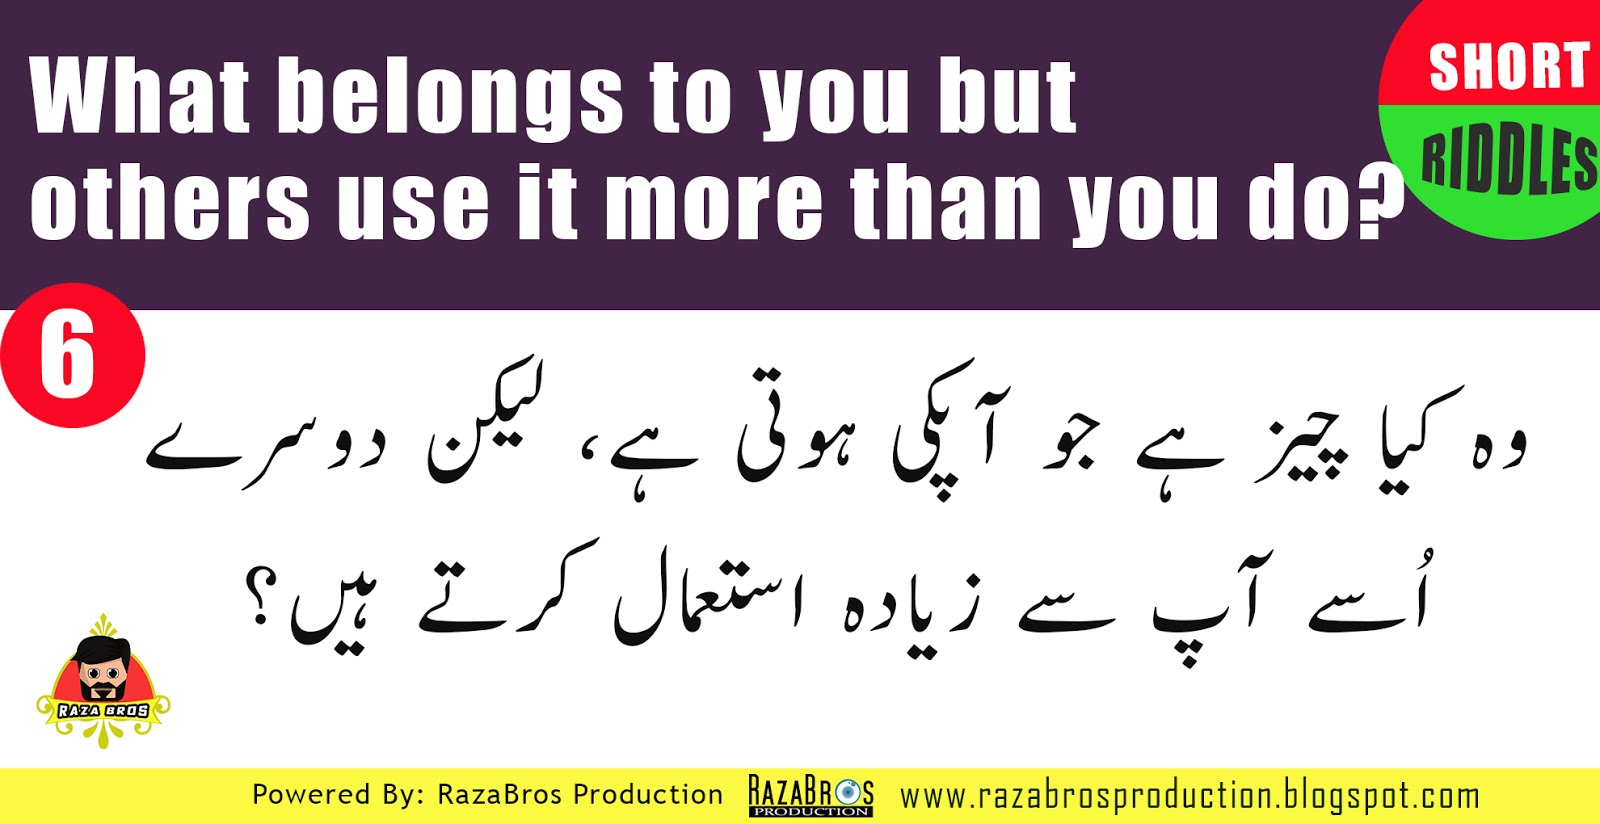 15 Interesting Short Riddles with Answers Urdu/English